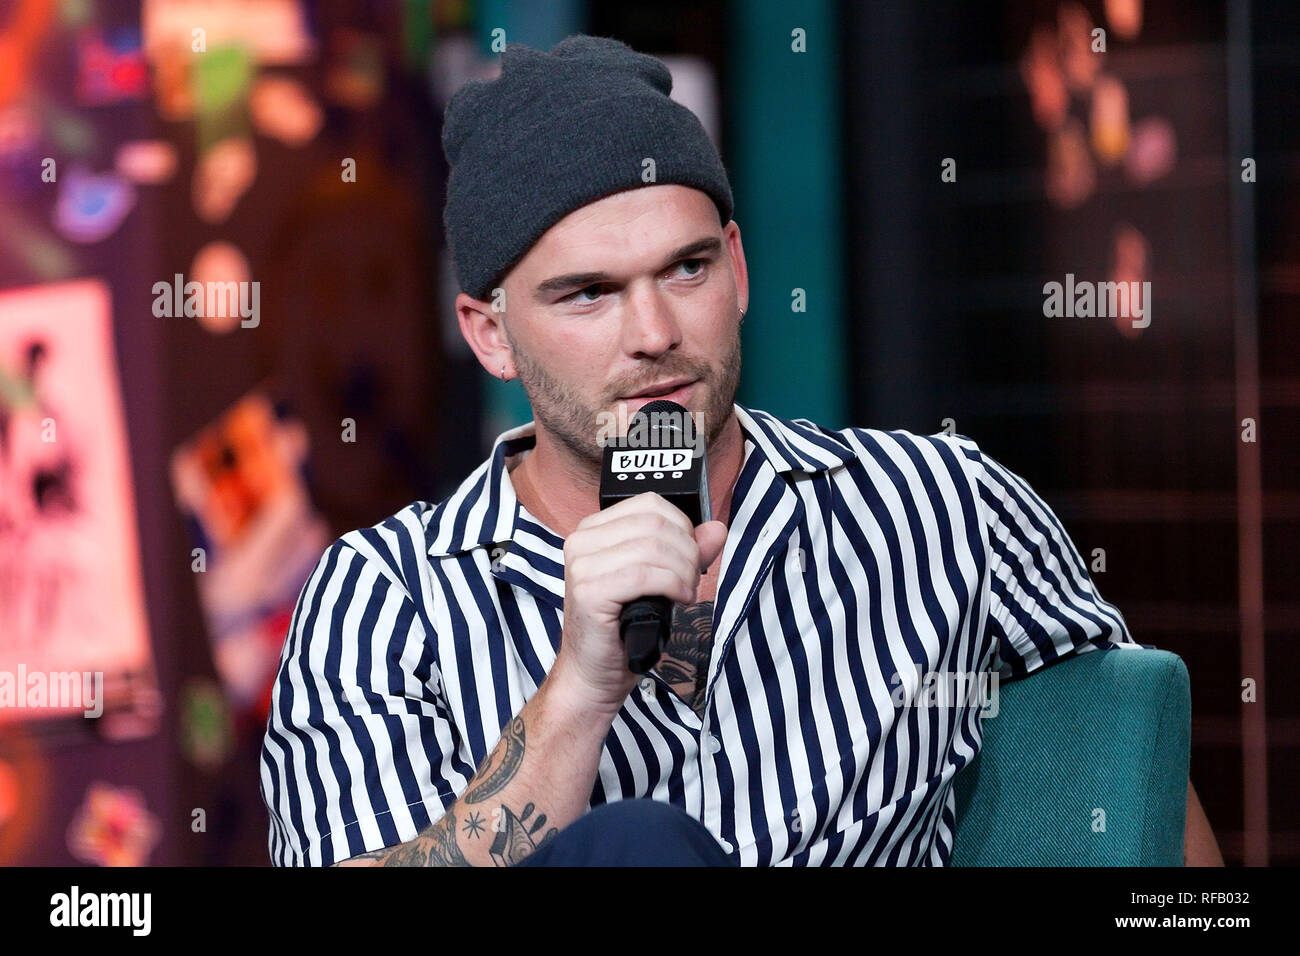 New York, USA. 24 Jan, 2019. Caleb Nott at The Thursday, Jan 24, 2019 BUILD Series Inside Candids of the band Broods discussing the new album 'Concious' at BUILD Studio in New York, USA. Credit: Steve Mack/S.D. Mack Pictures/Alamy Live News Stock Photo